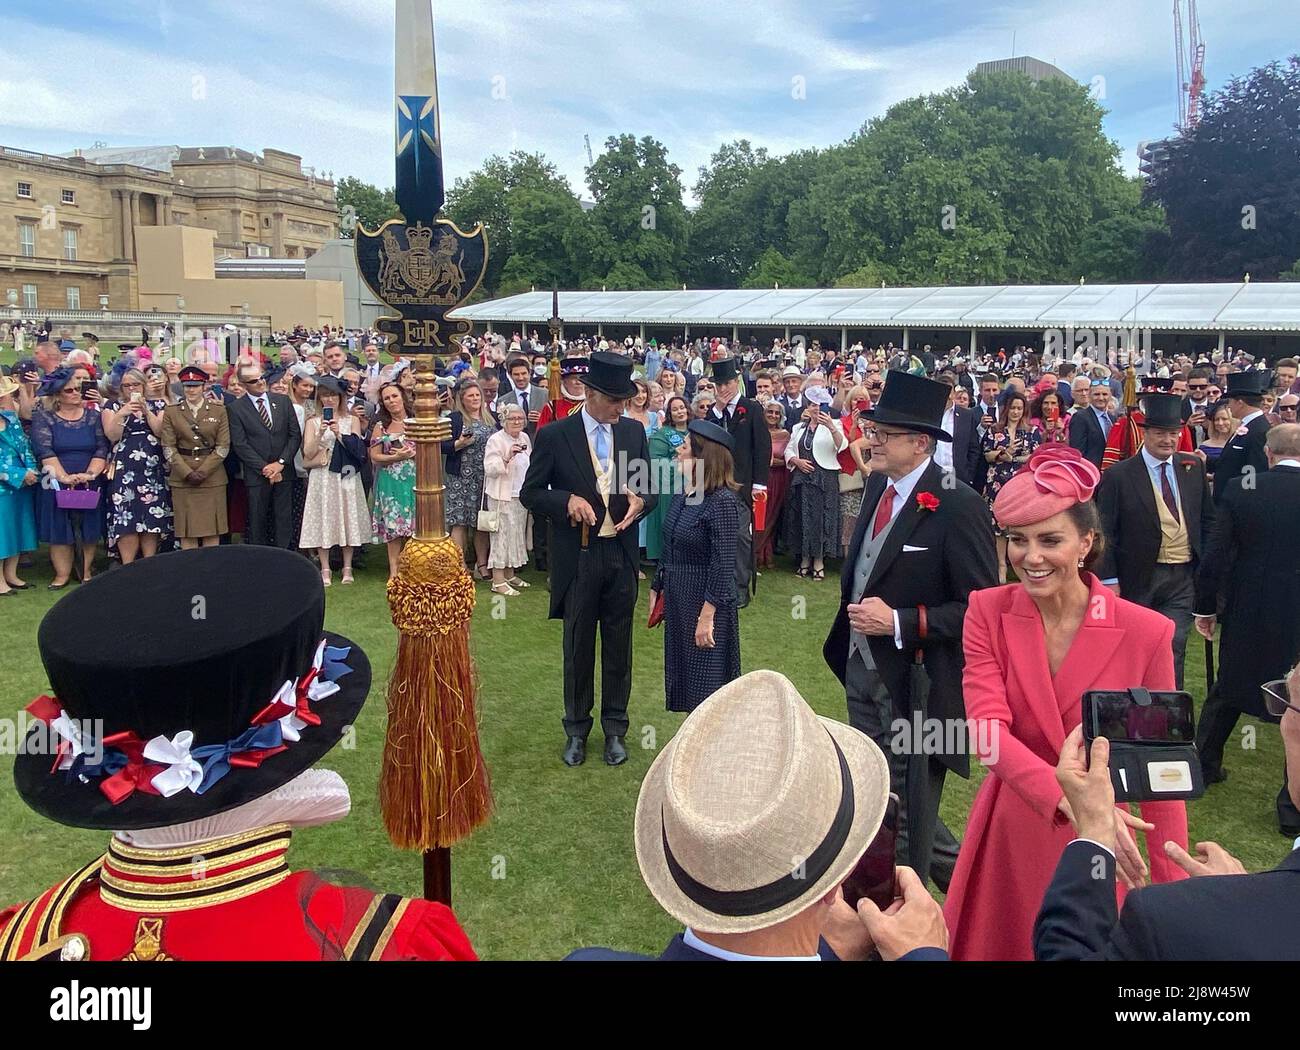 Kate Middleton, the Duchess of Cambridge, attending a Garden Party at Buckingham Palace in London. Photo date: Wednesday, May 18, 2022. Photo: Richard Gray/Alamy Live News Stock Photo